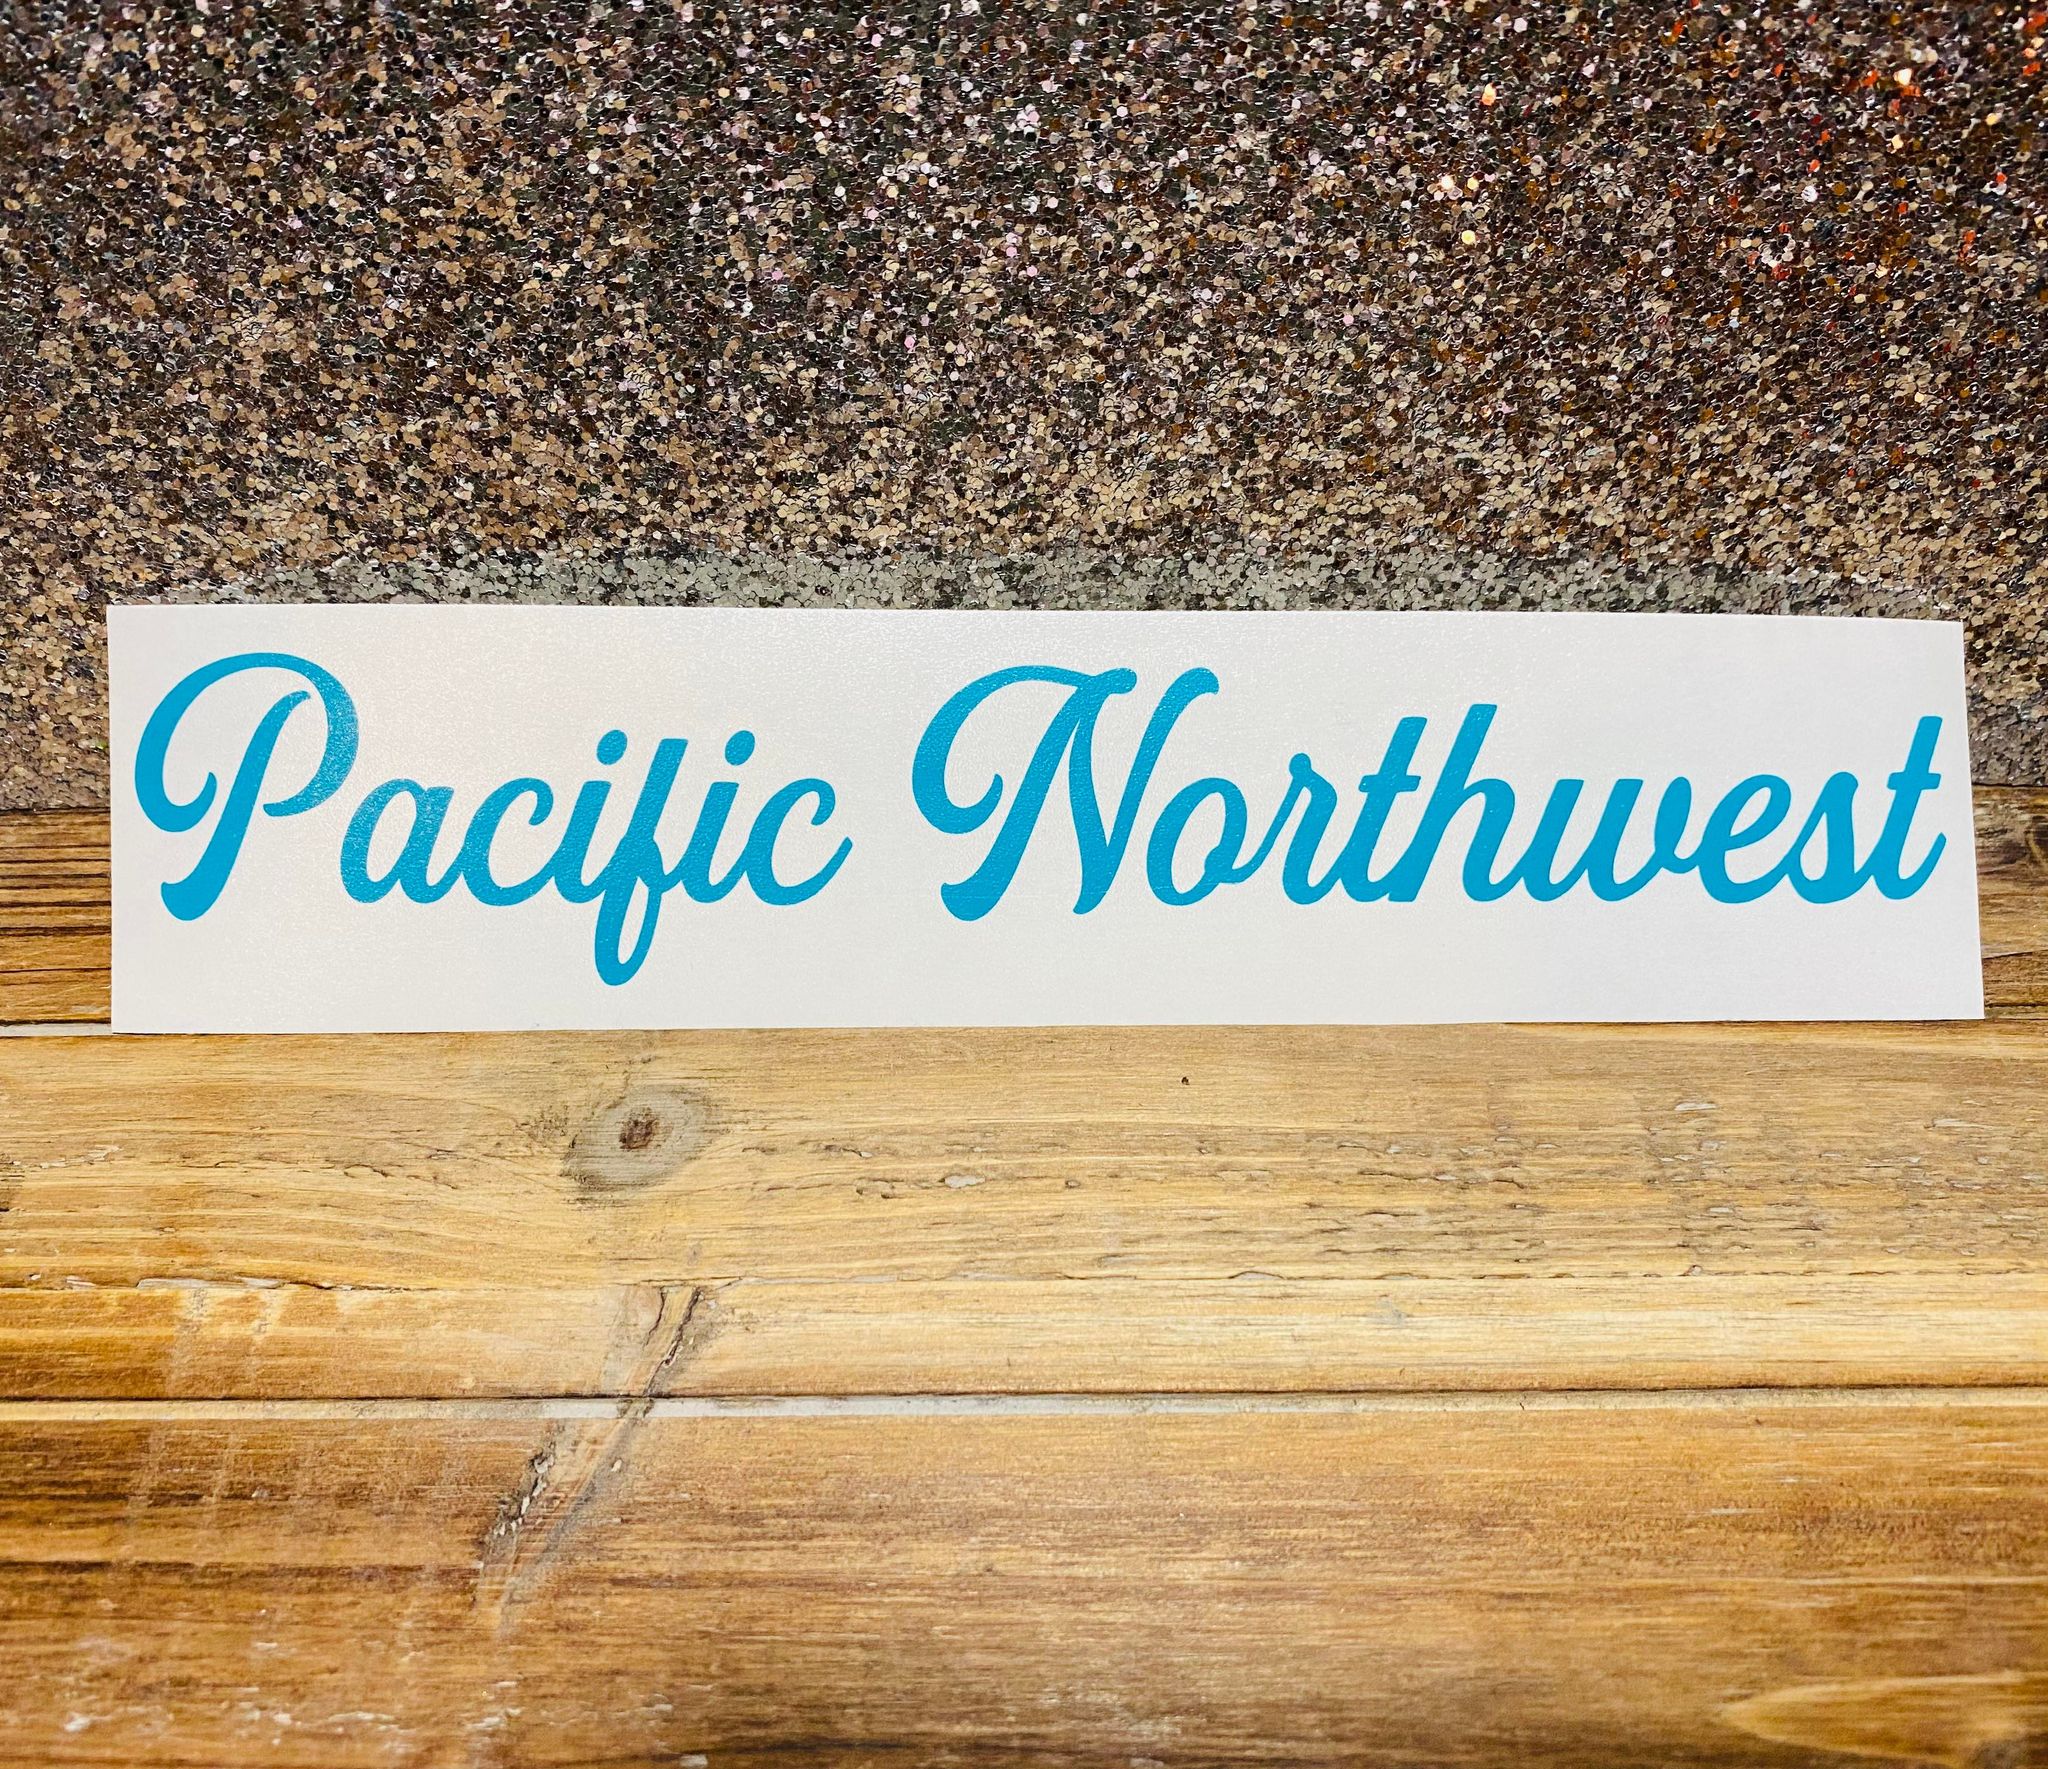 The Pacific Northwest Decal